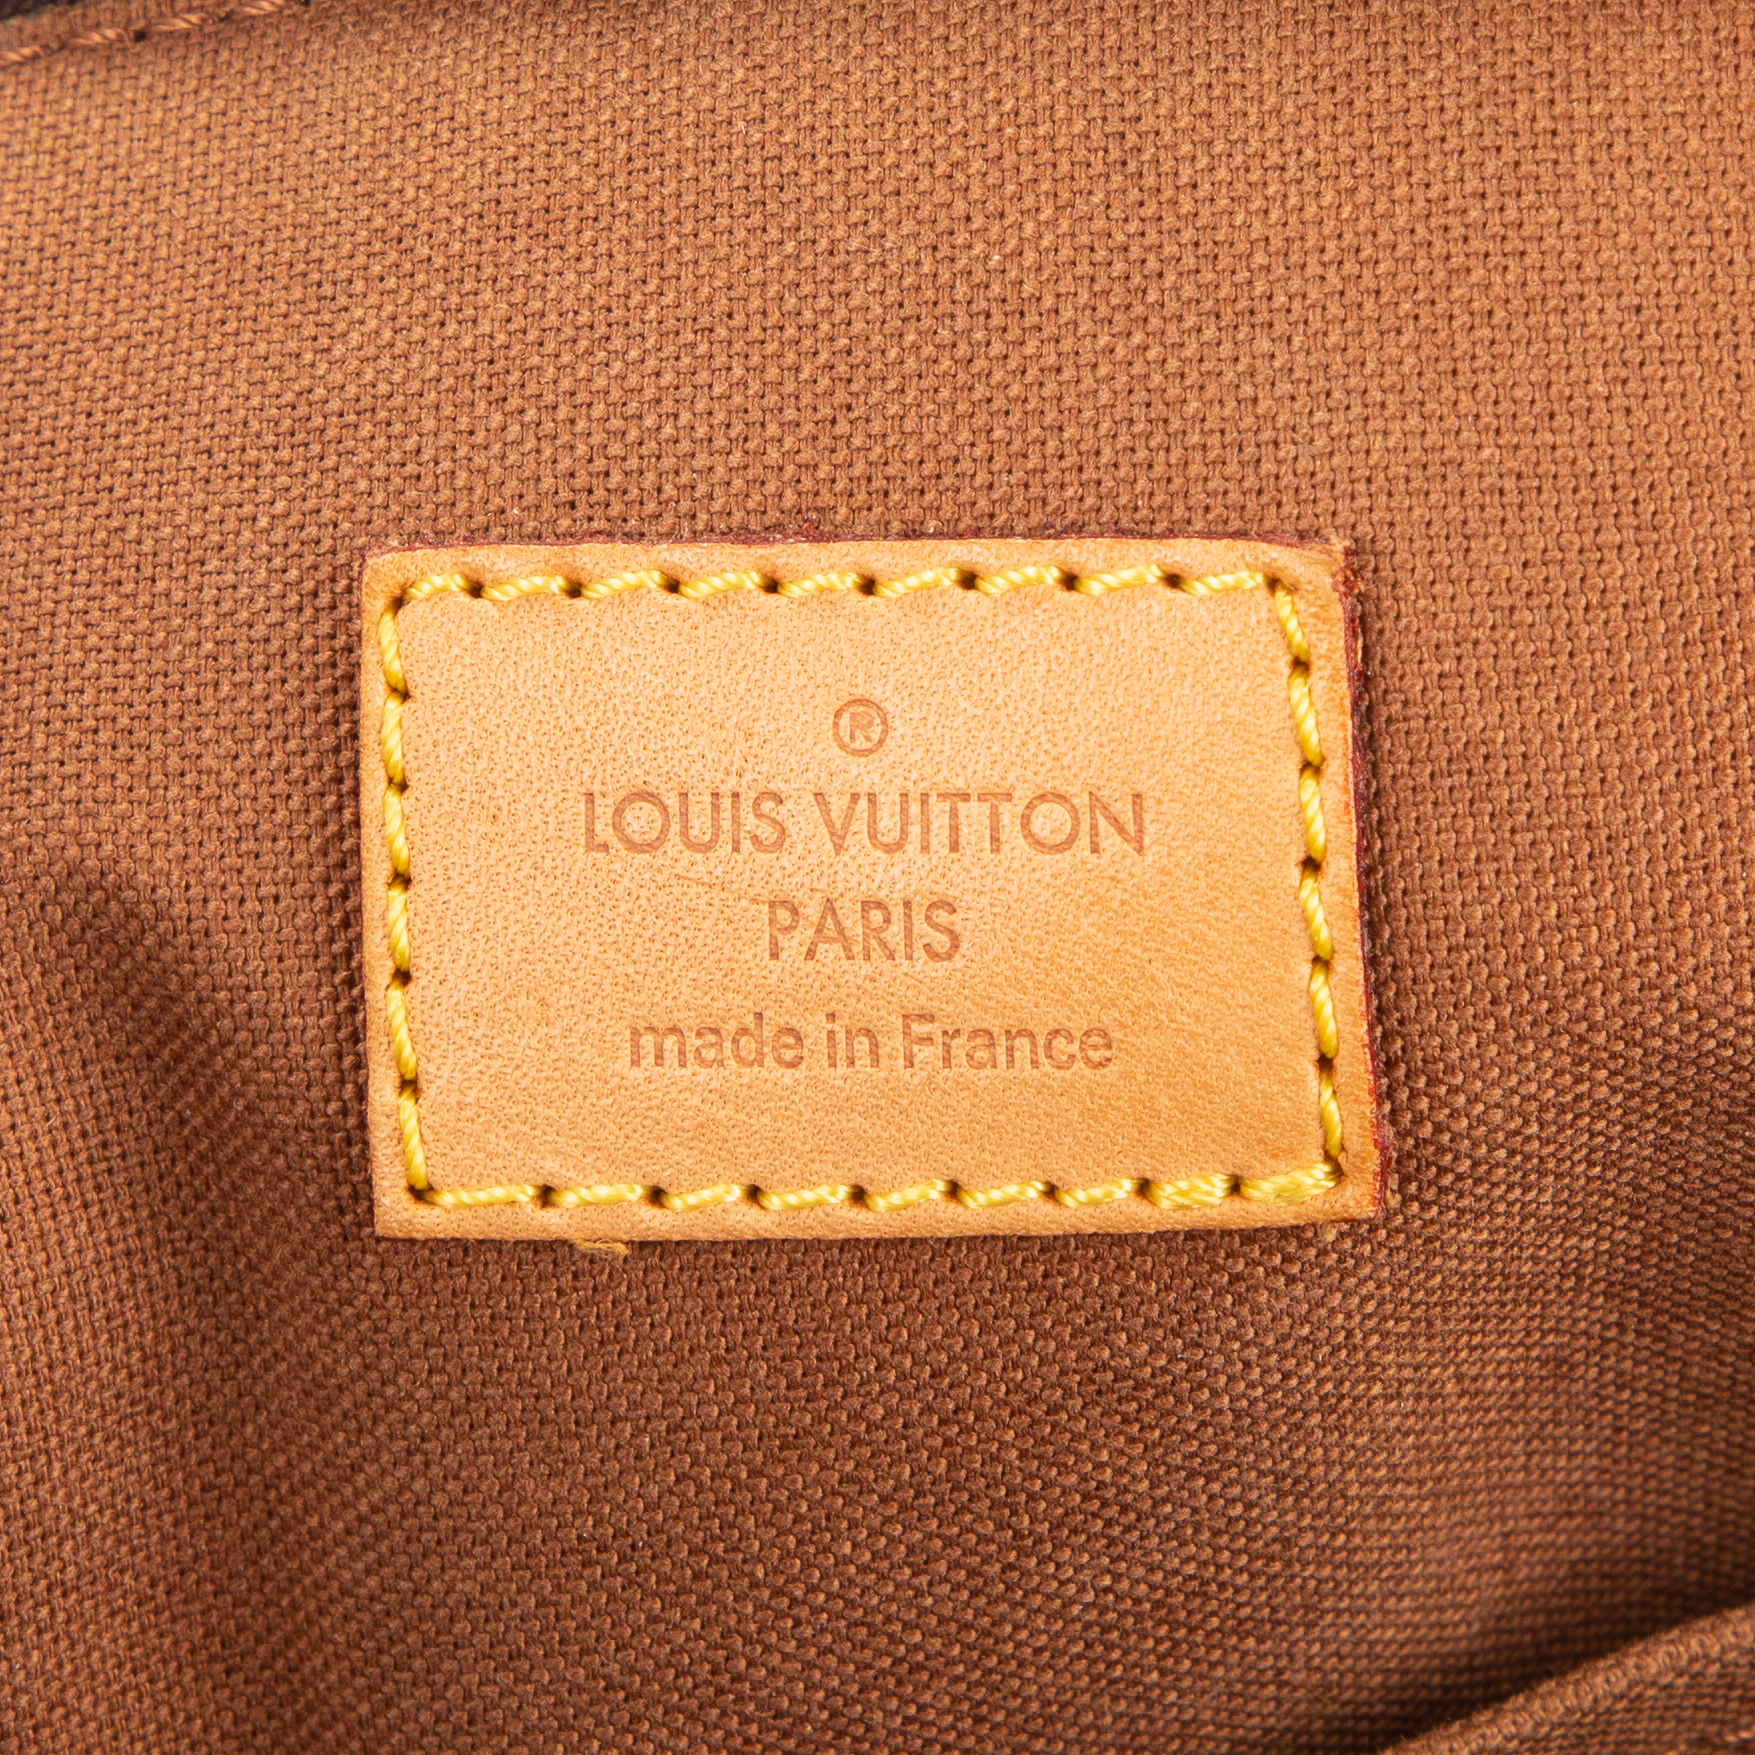 Authentic Louis Vuitton Tivoli GM Bag Made in FRANCE Serial 